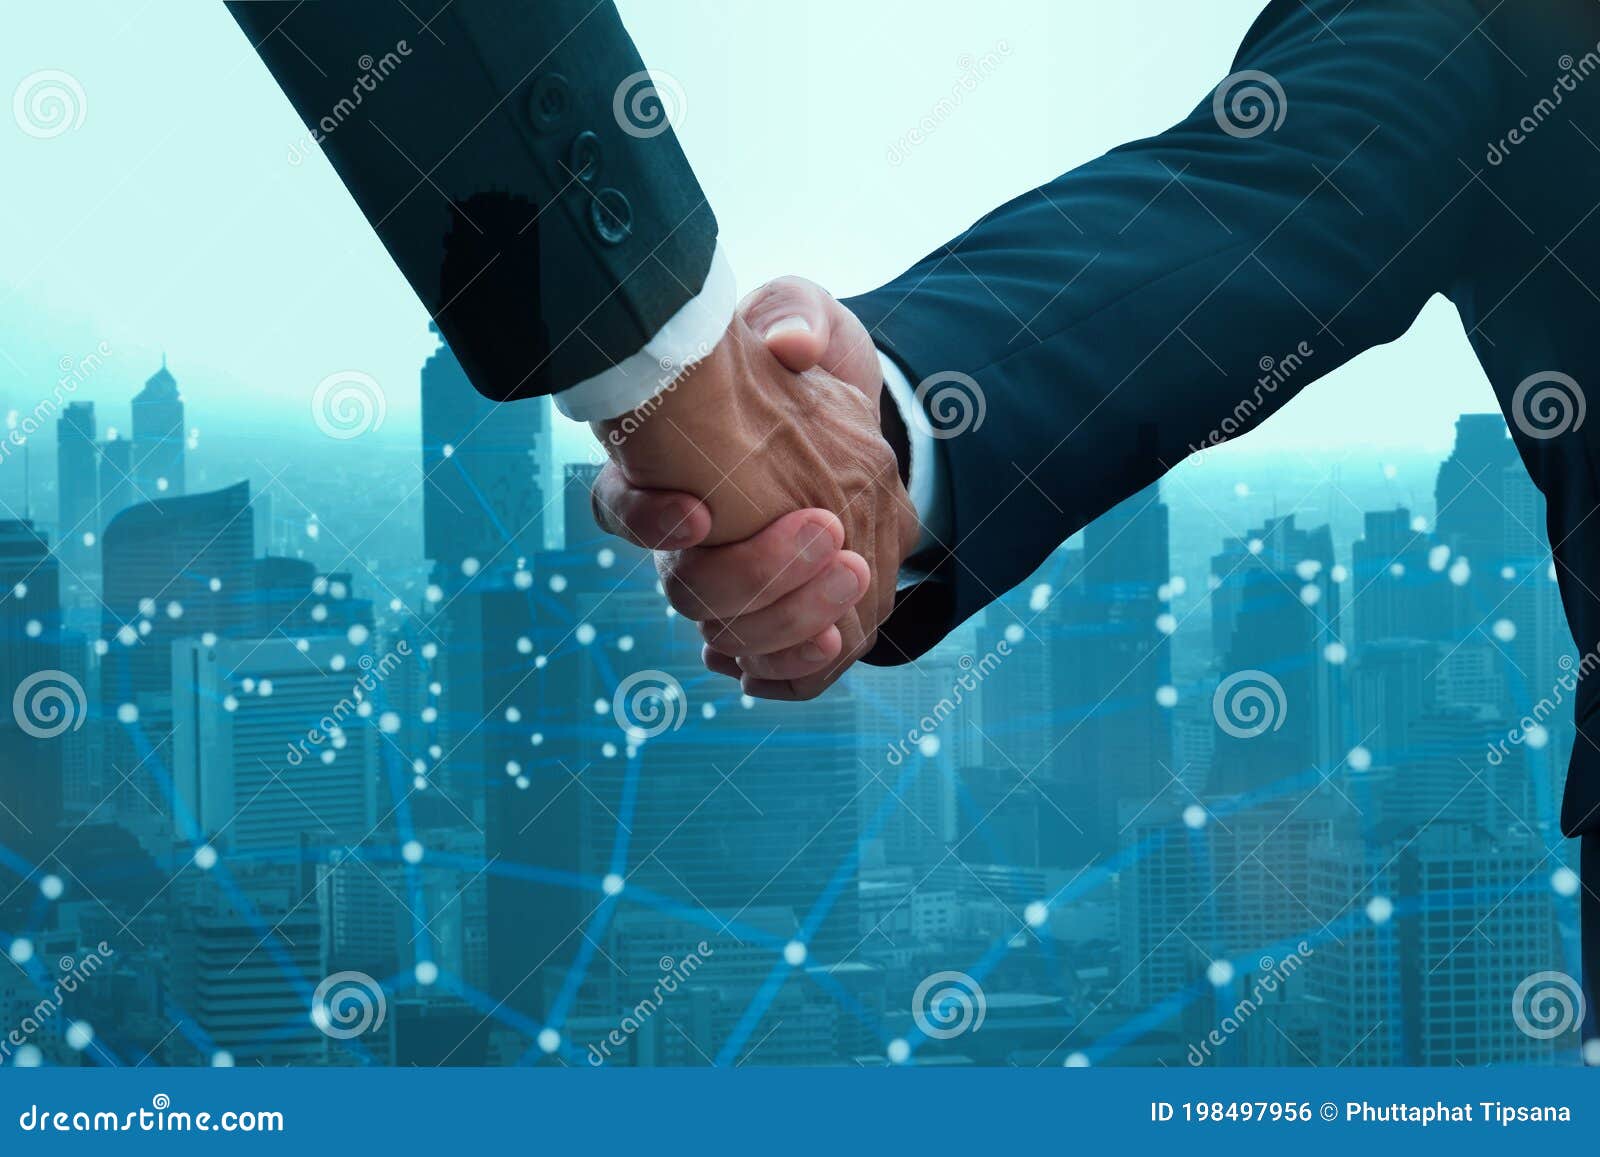 industry investment and telecommunication business concept, business people team join and handshake and negotiate for mergers and